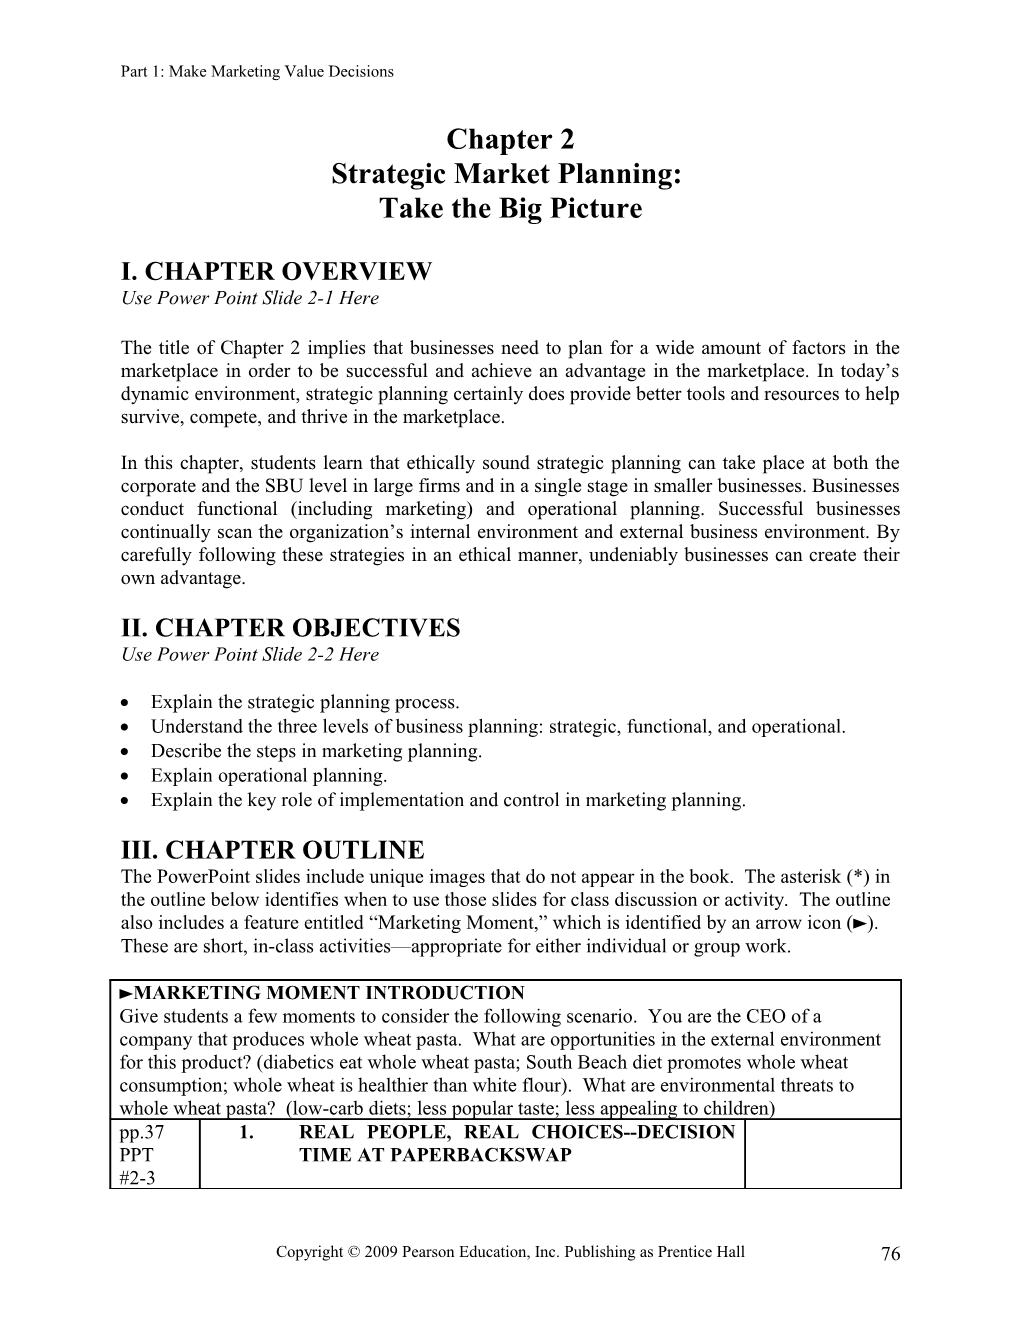 Chapter 2: Strategic Market Planning: Take the Big Picture